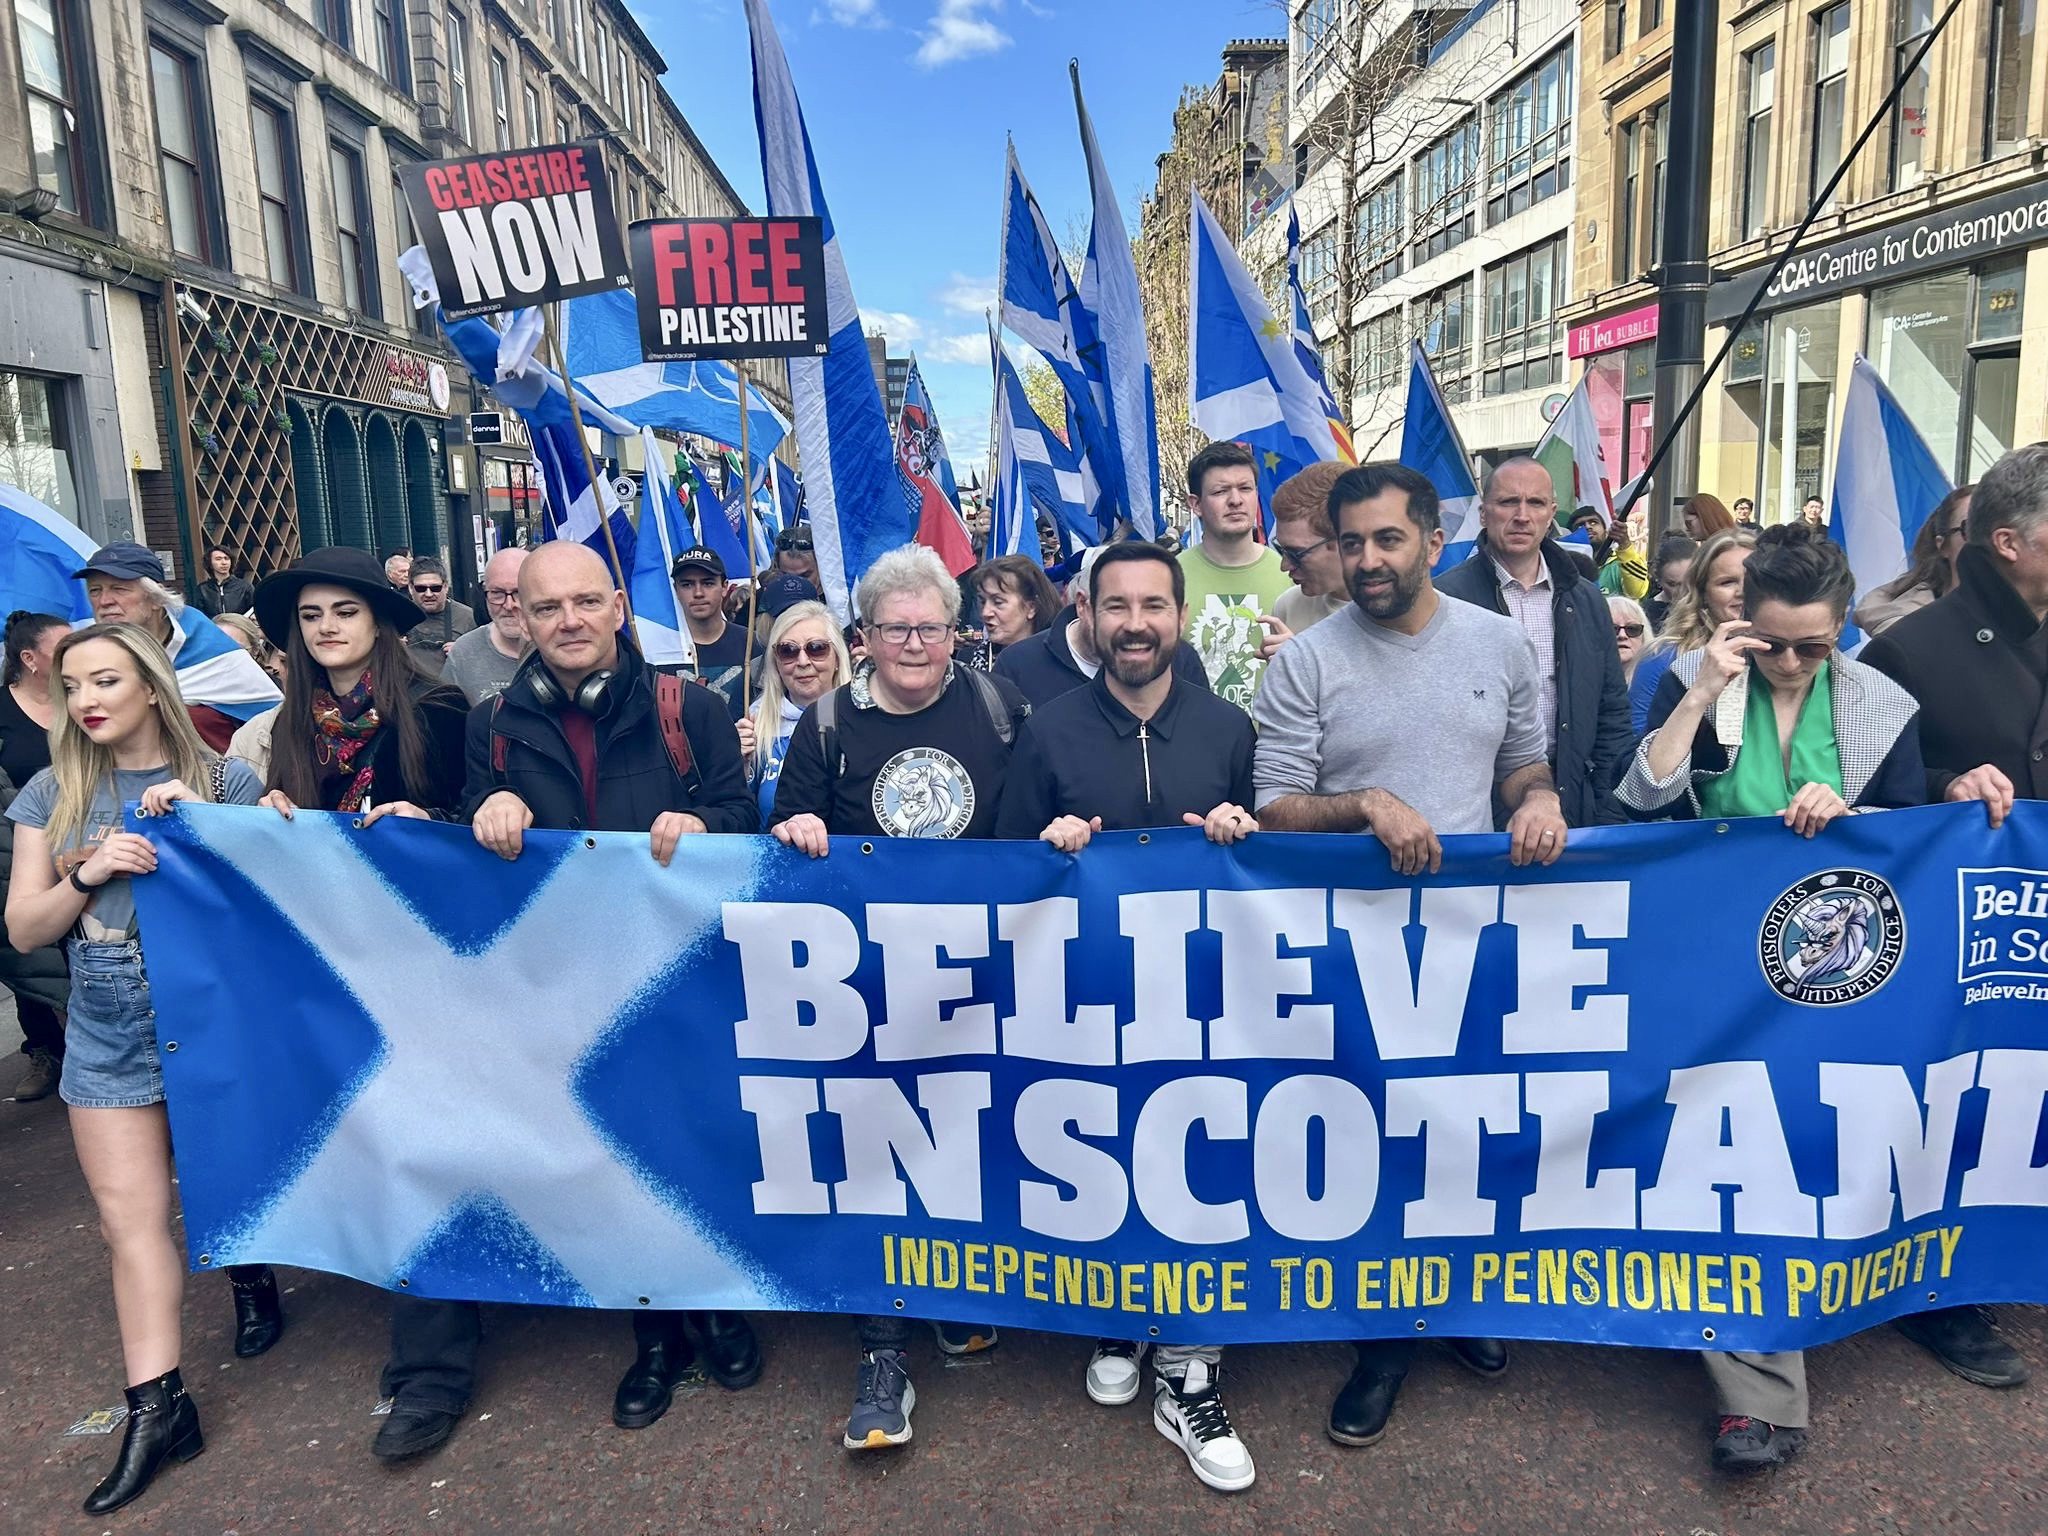 Independence Rally. Speaking up for Scotland